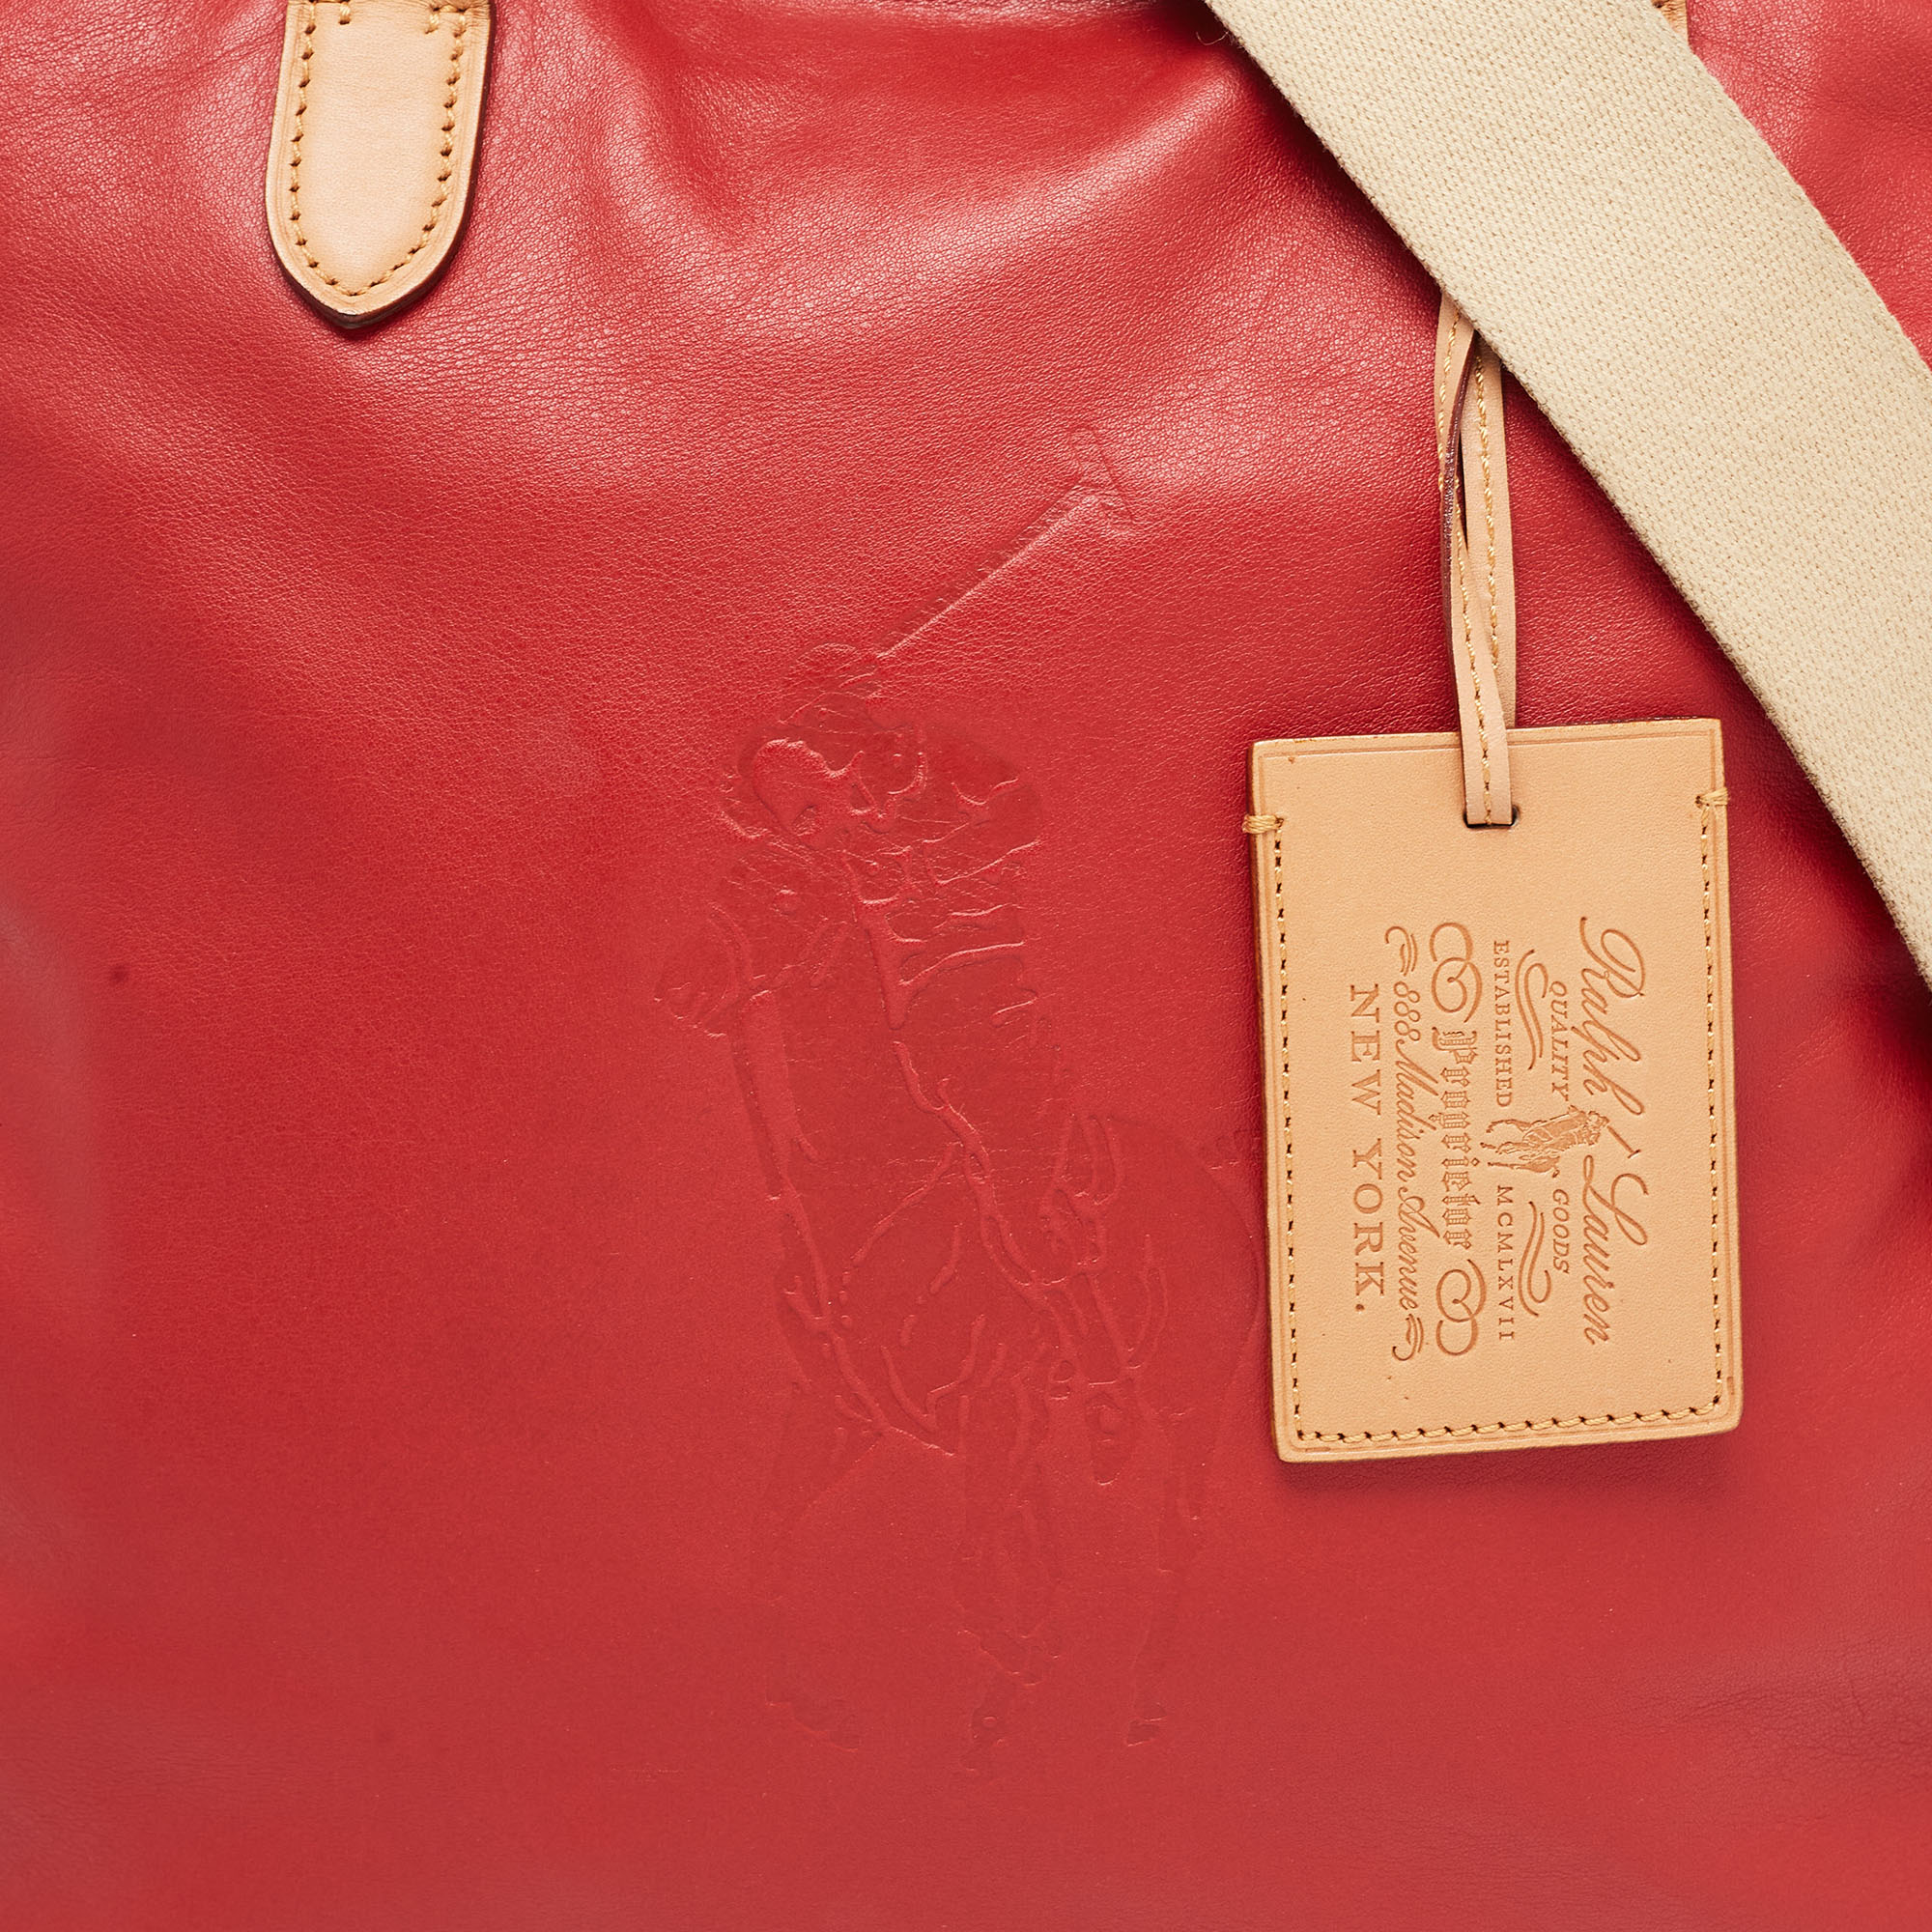 Ralph Lauren Red/Tan Leather  Shopper Tote